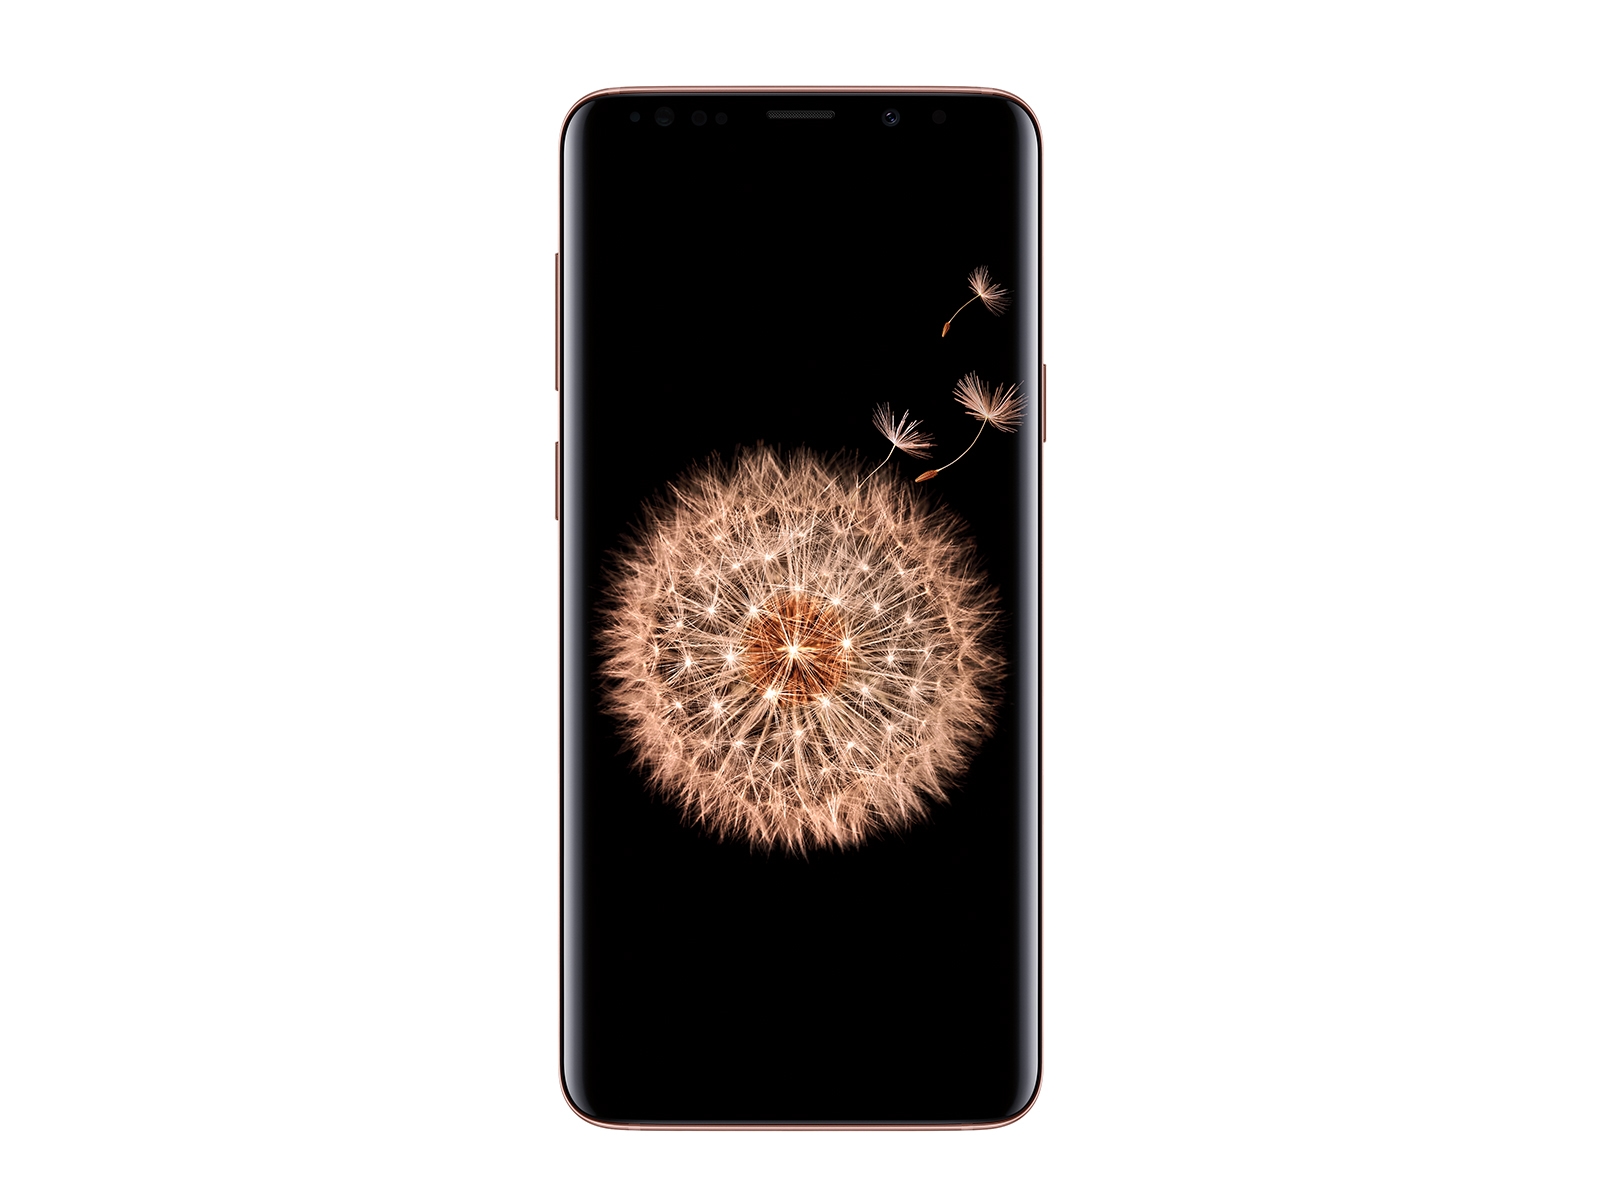 Samsung Galaxy S9 Plus deep dive review: Best of the best